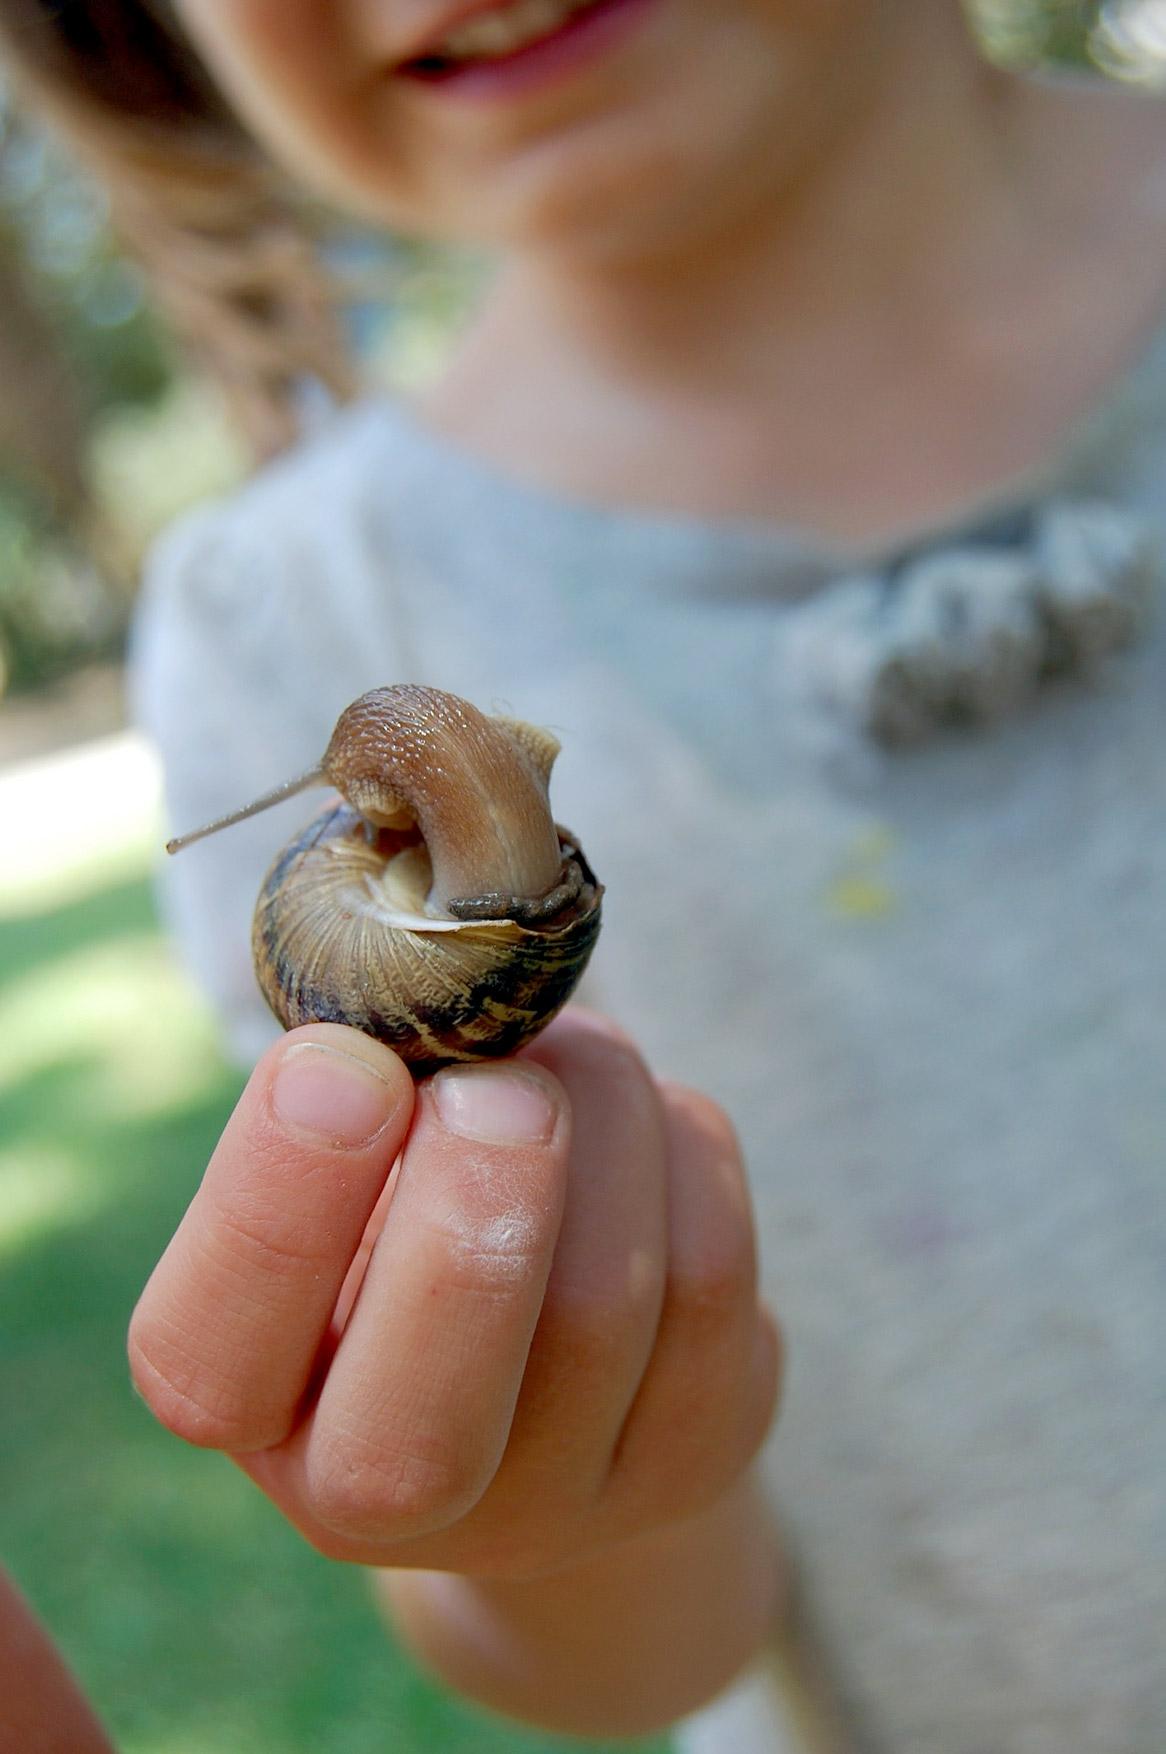 Child holding a snail. Image by Anita S. from Pixabay 